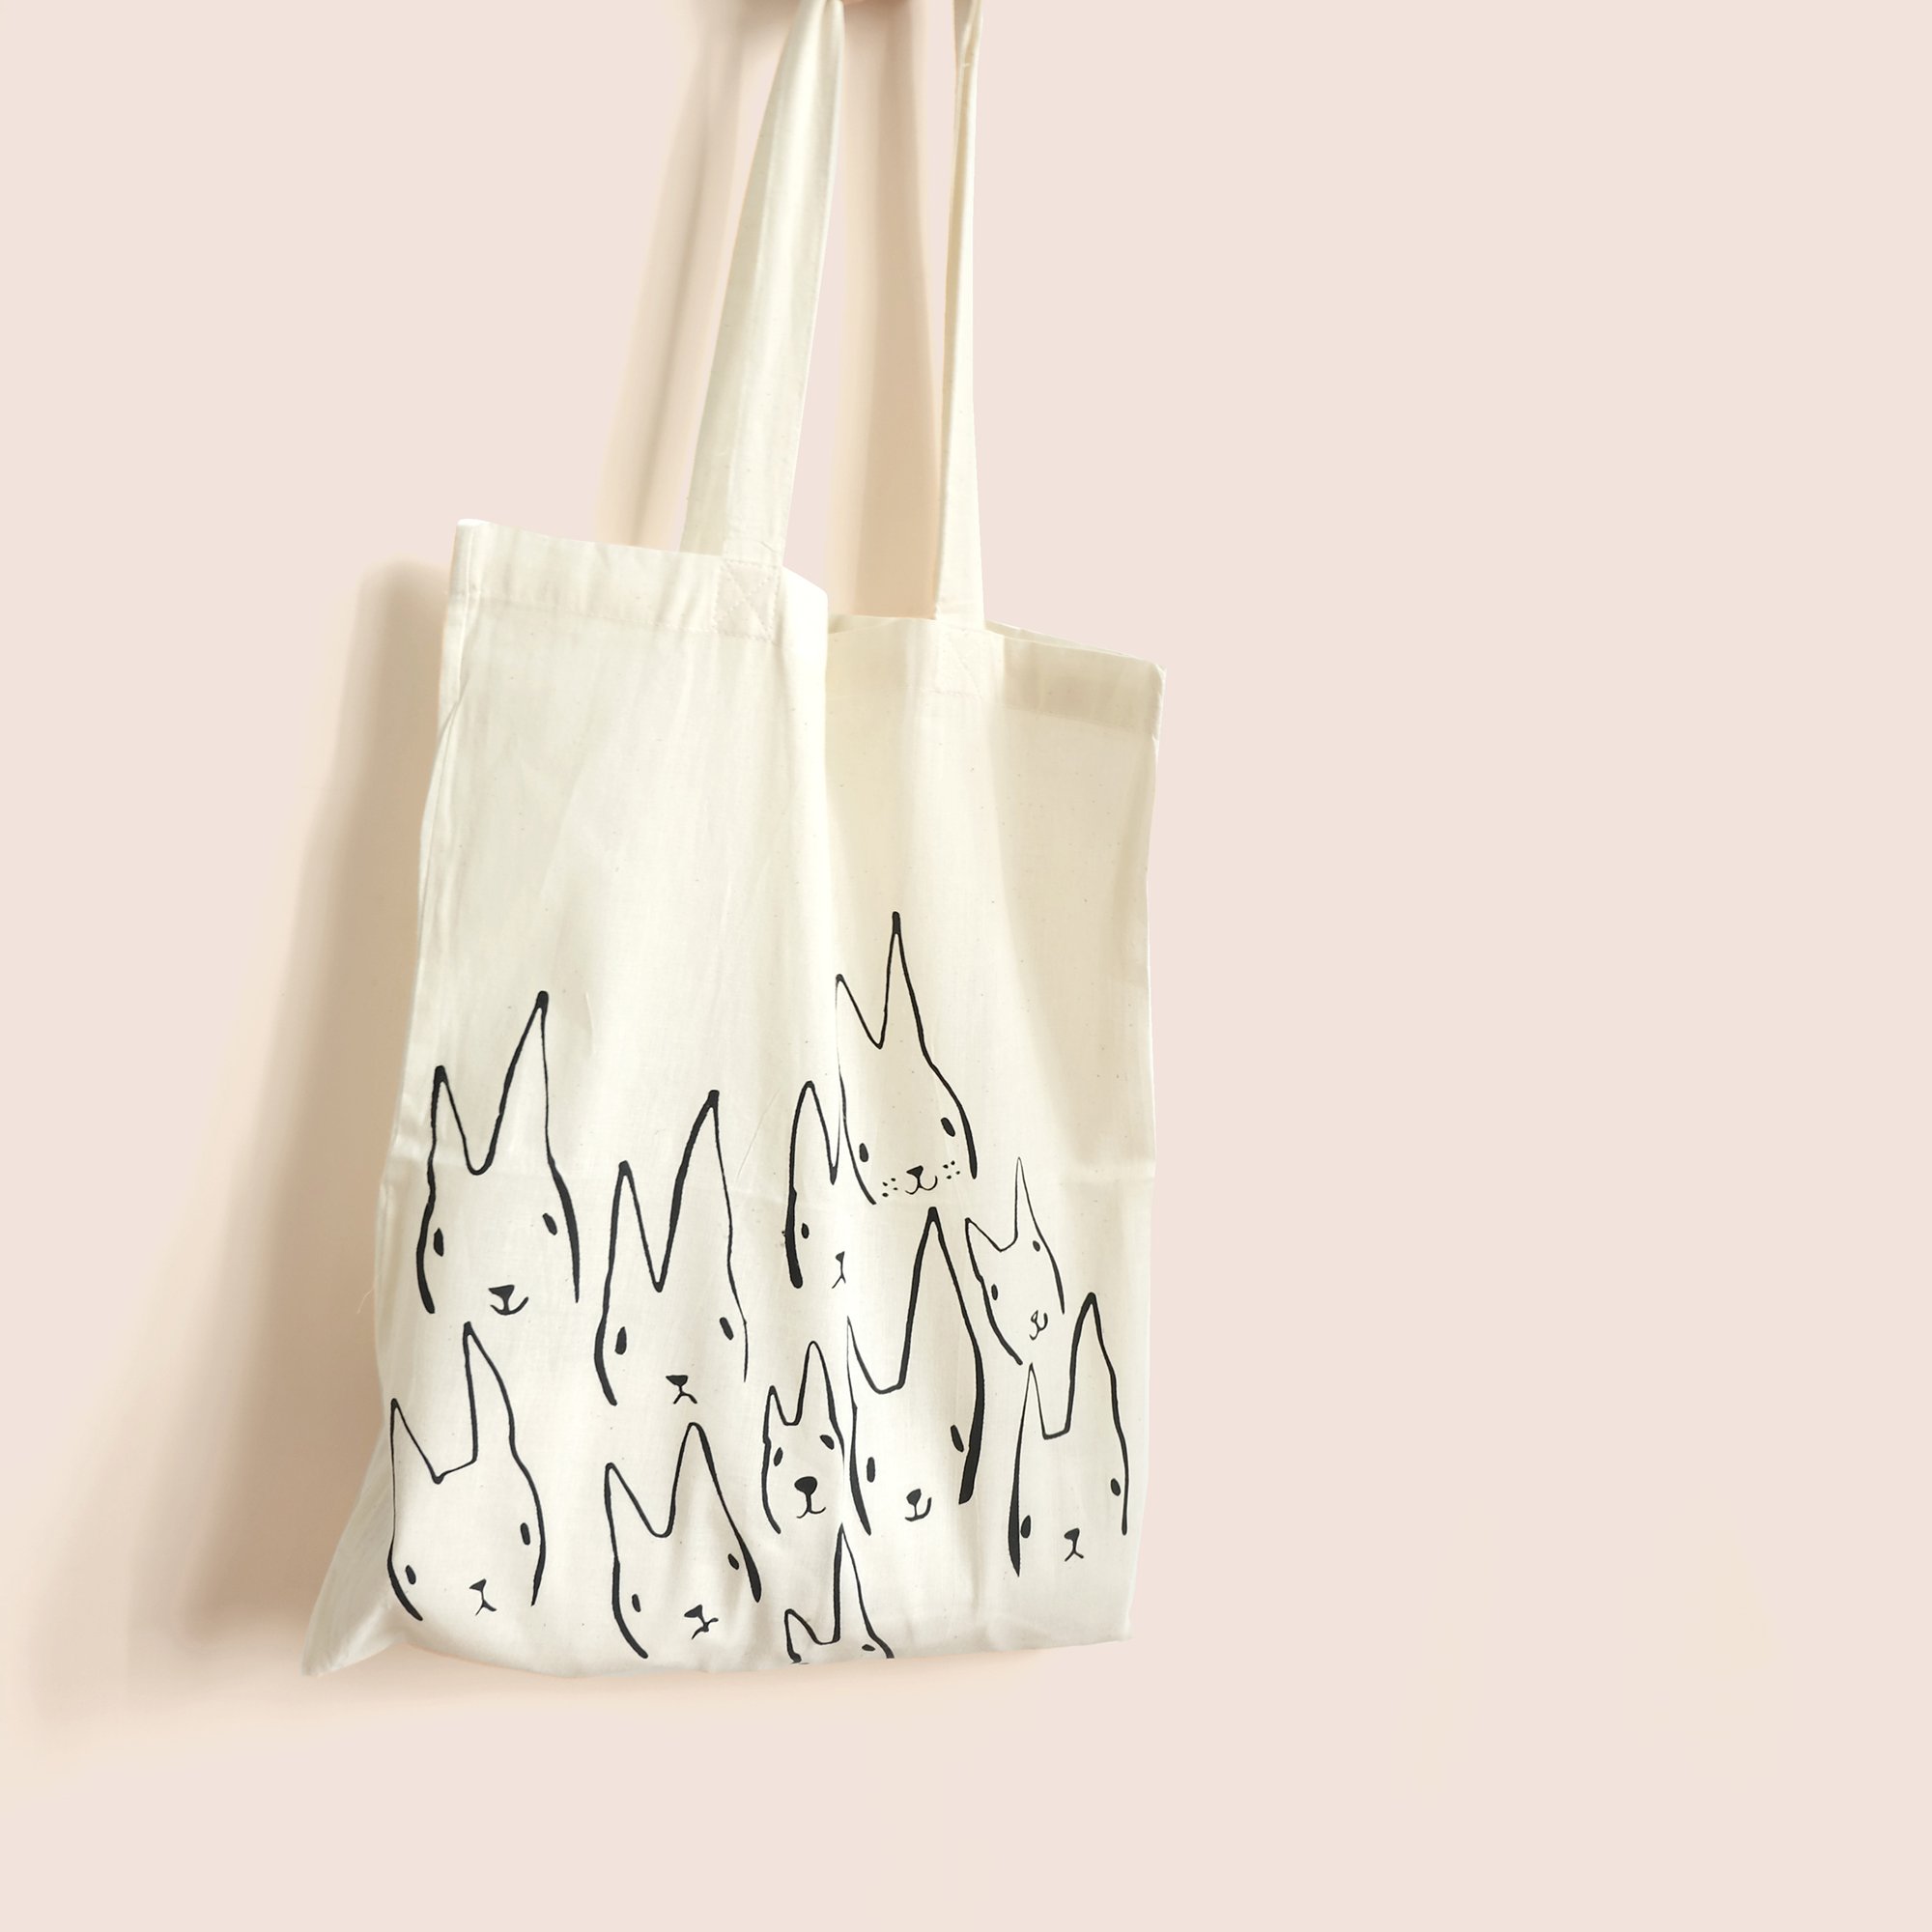 Image of Catch the Rabbit tote bag (1 left)